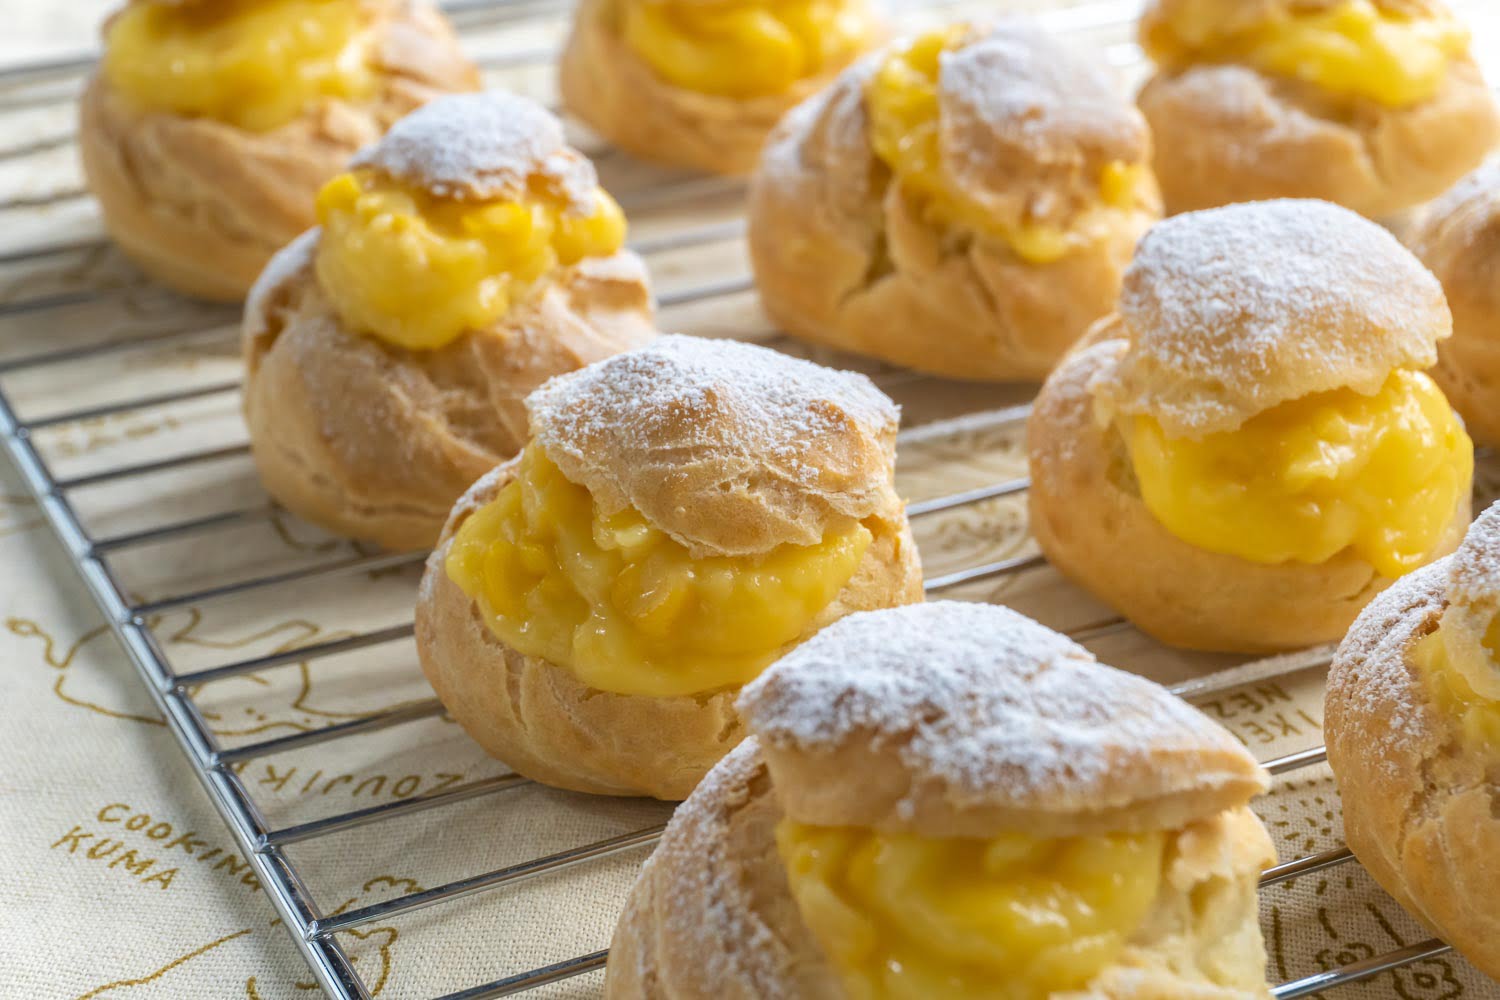 Easy Cream Puffs with Custard Creamy Corn Filling - My Lovely Recipes